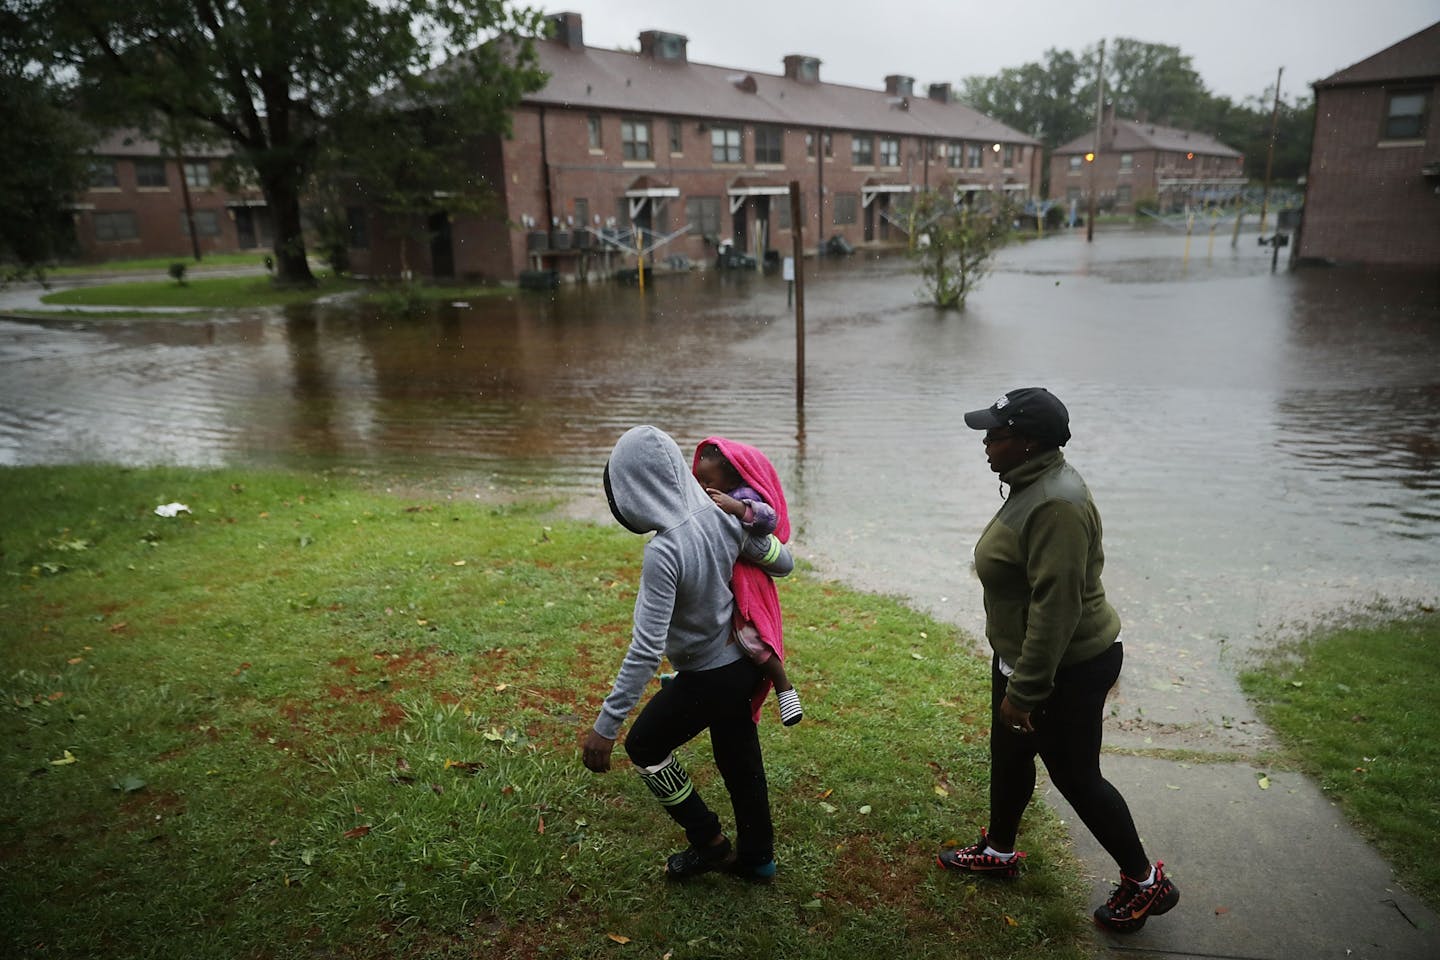 A woman carries a child past an area where flood water surrounds low-rise apartment buildings.